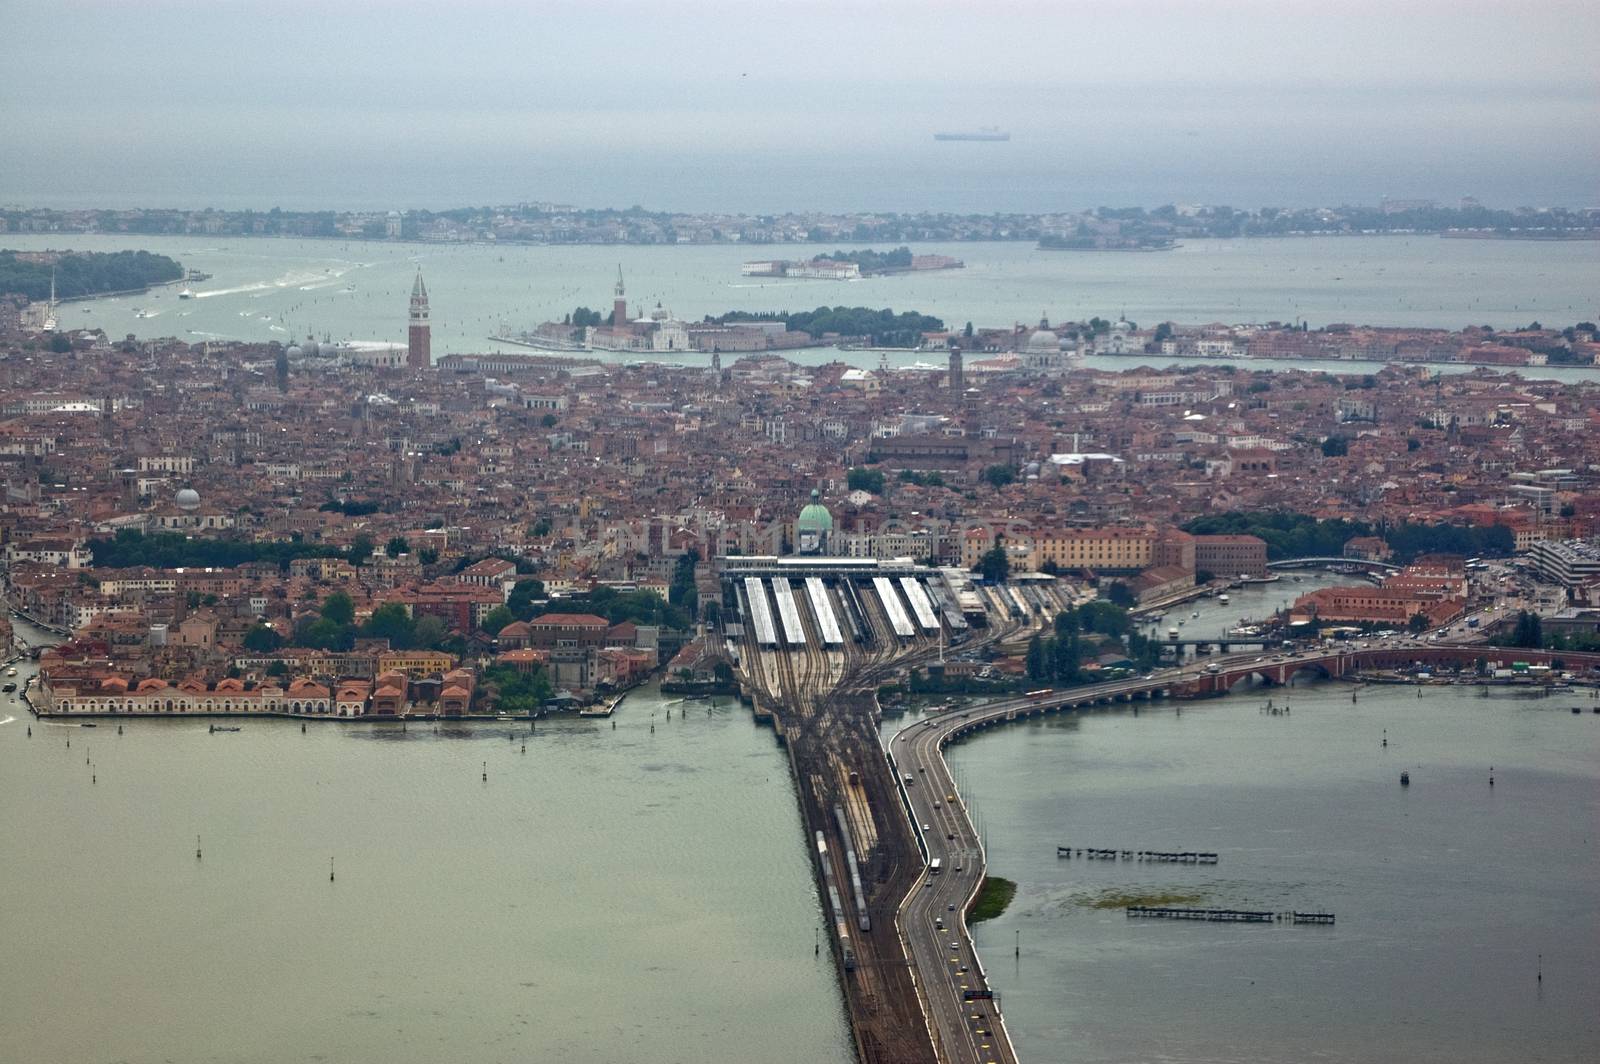 Venice, Italy as seen from the air. The road and rail link from Piazzale Roma and the railway station actoss the Ponte della Liberta to the mainland is in the foreground.